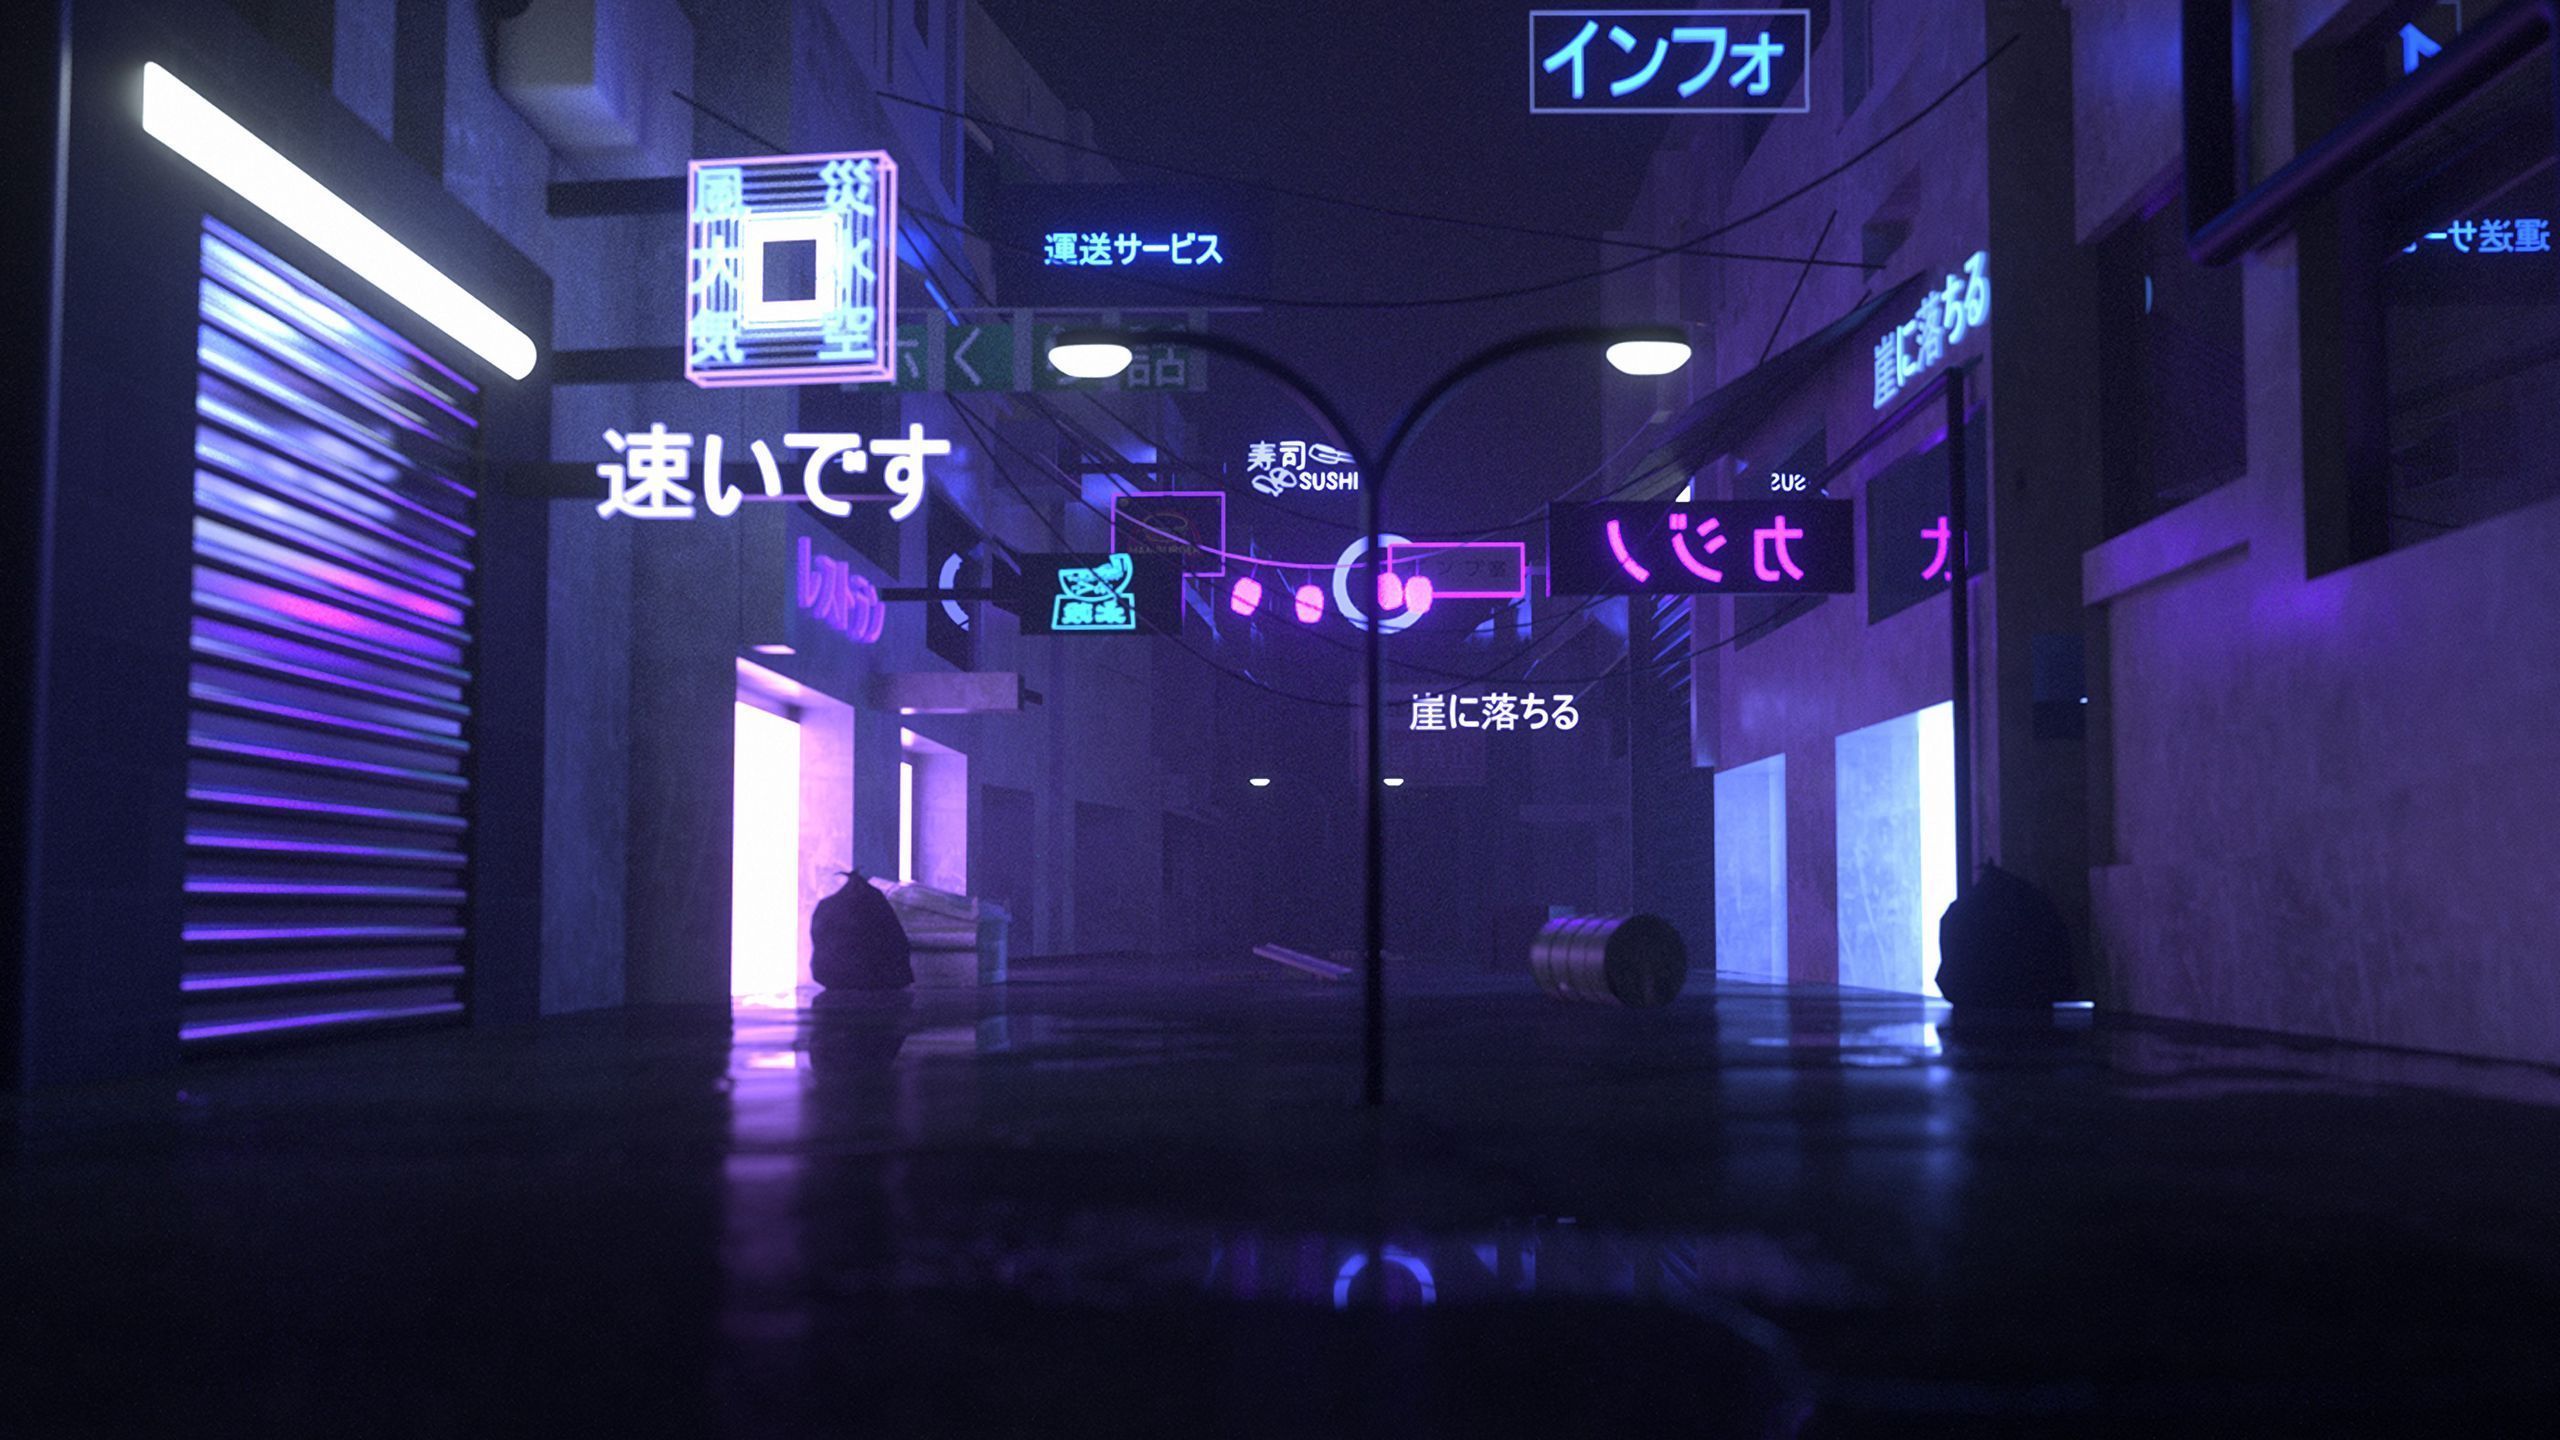 A dark alley with neon lights and signs - 2560x1440